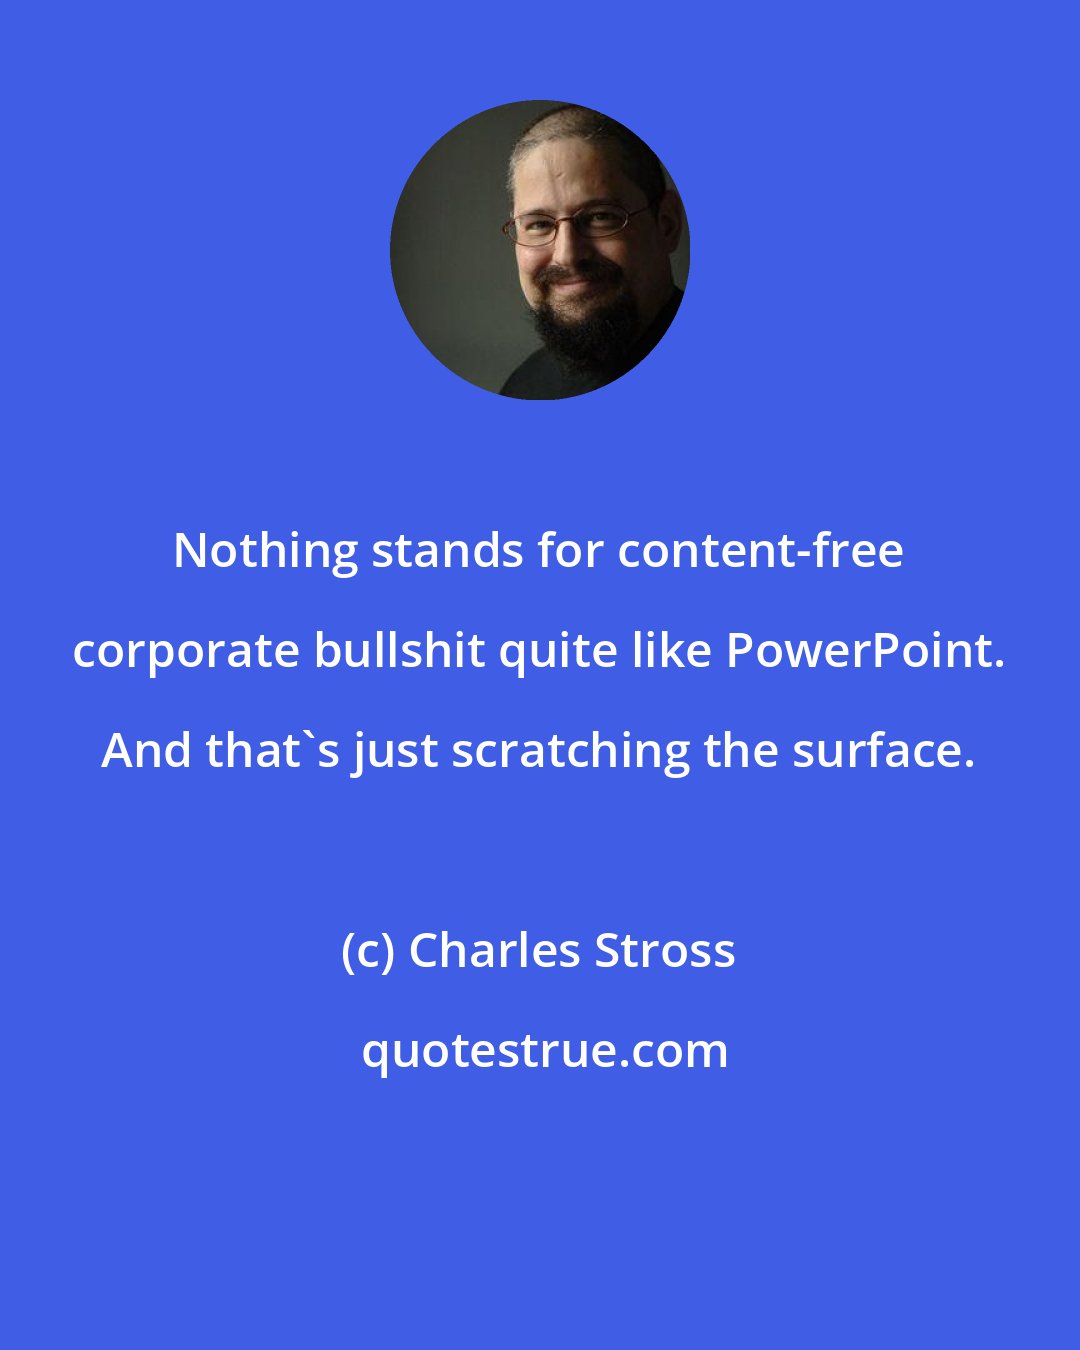 Charles Stross: Nothing stands for content-free corporate bullshit quite like PowerPoint. And that's just scratching the surface.